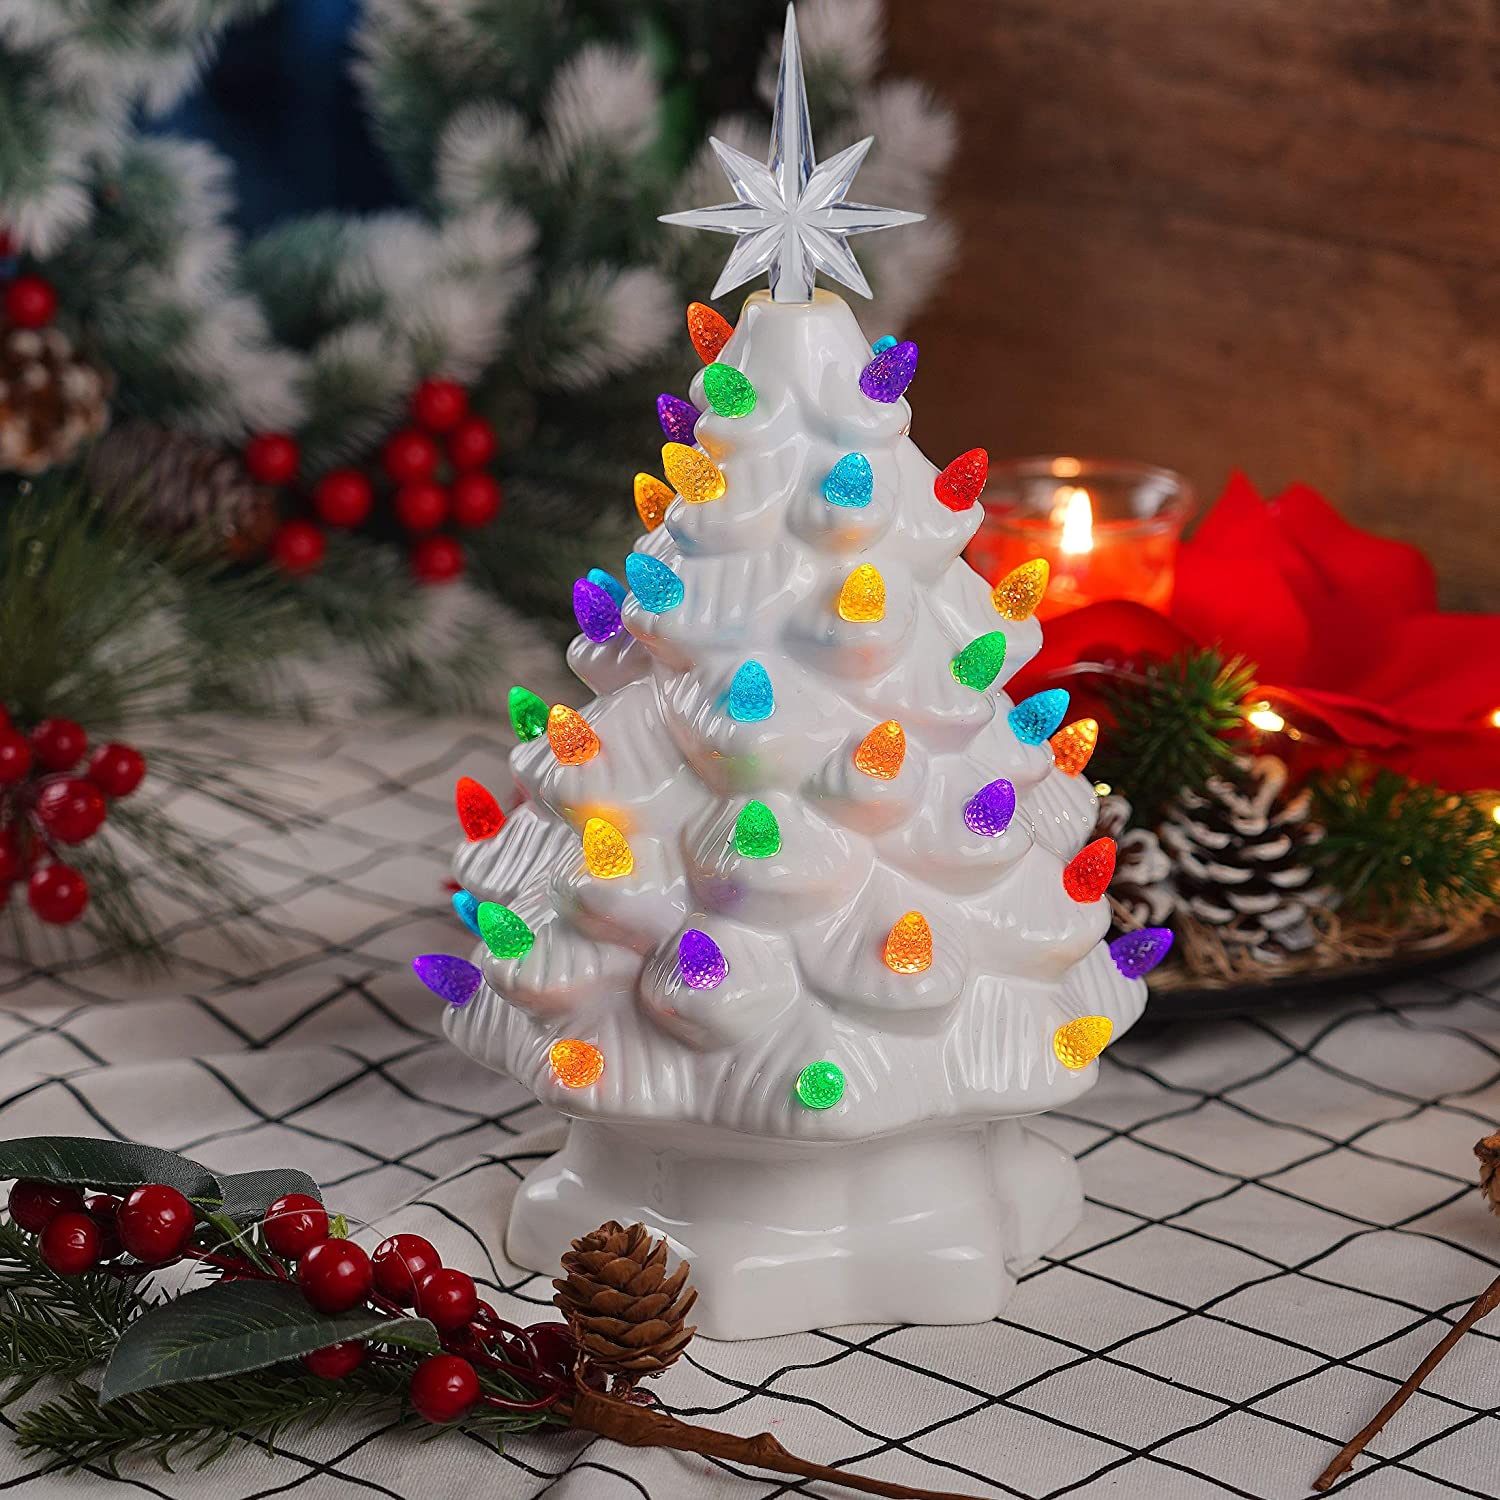 Lulu Home Ceramic Christmas Tree, 10 Inch LED Light Up Ceramic Tabletop Christmas Tree with 54 Multicolored Lights and a 7 Point Star Topper, White Mini Vintage Lighted Ceramic Tree for Tabletop